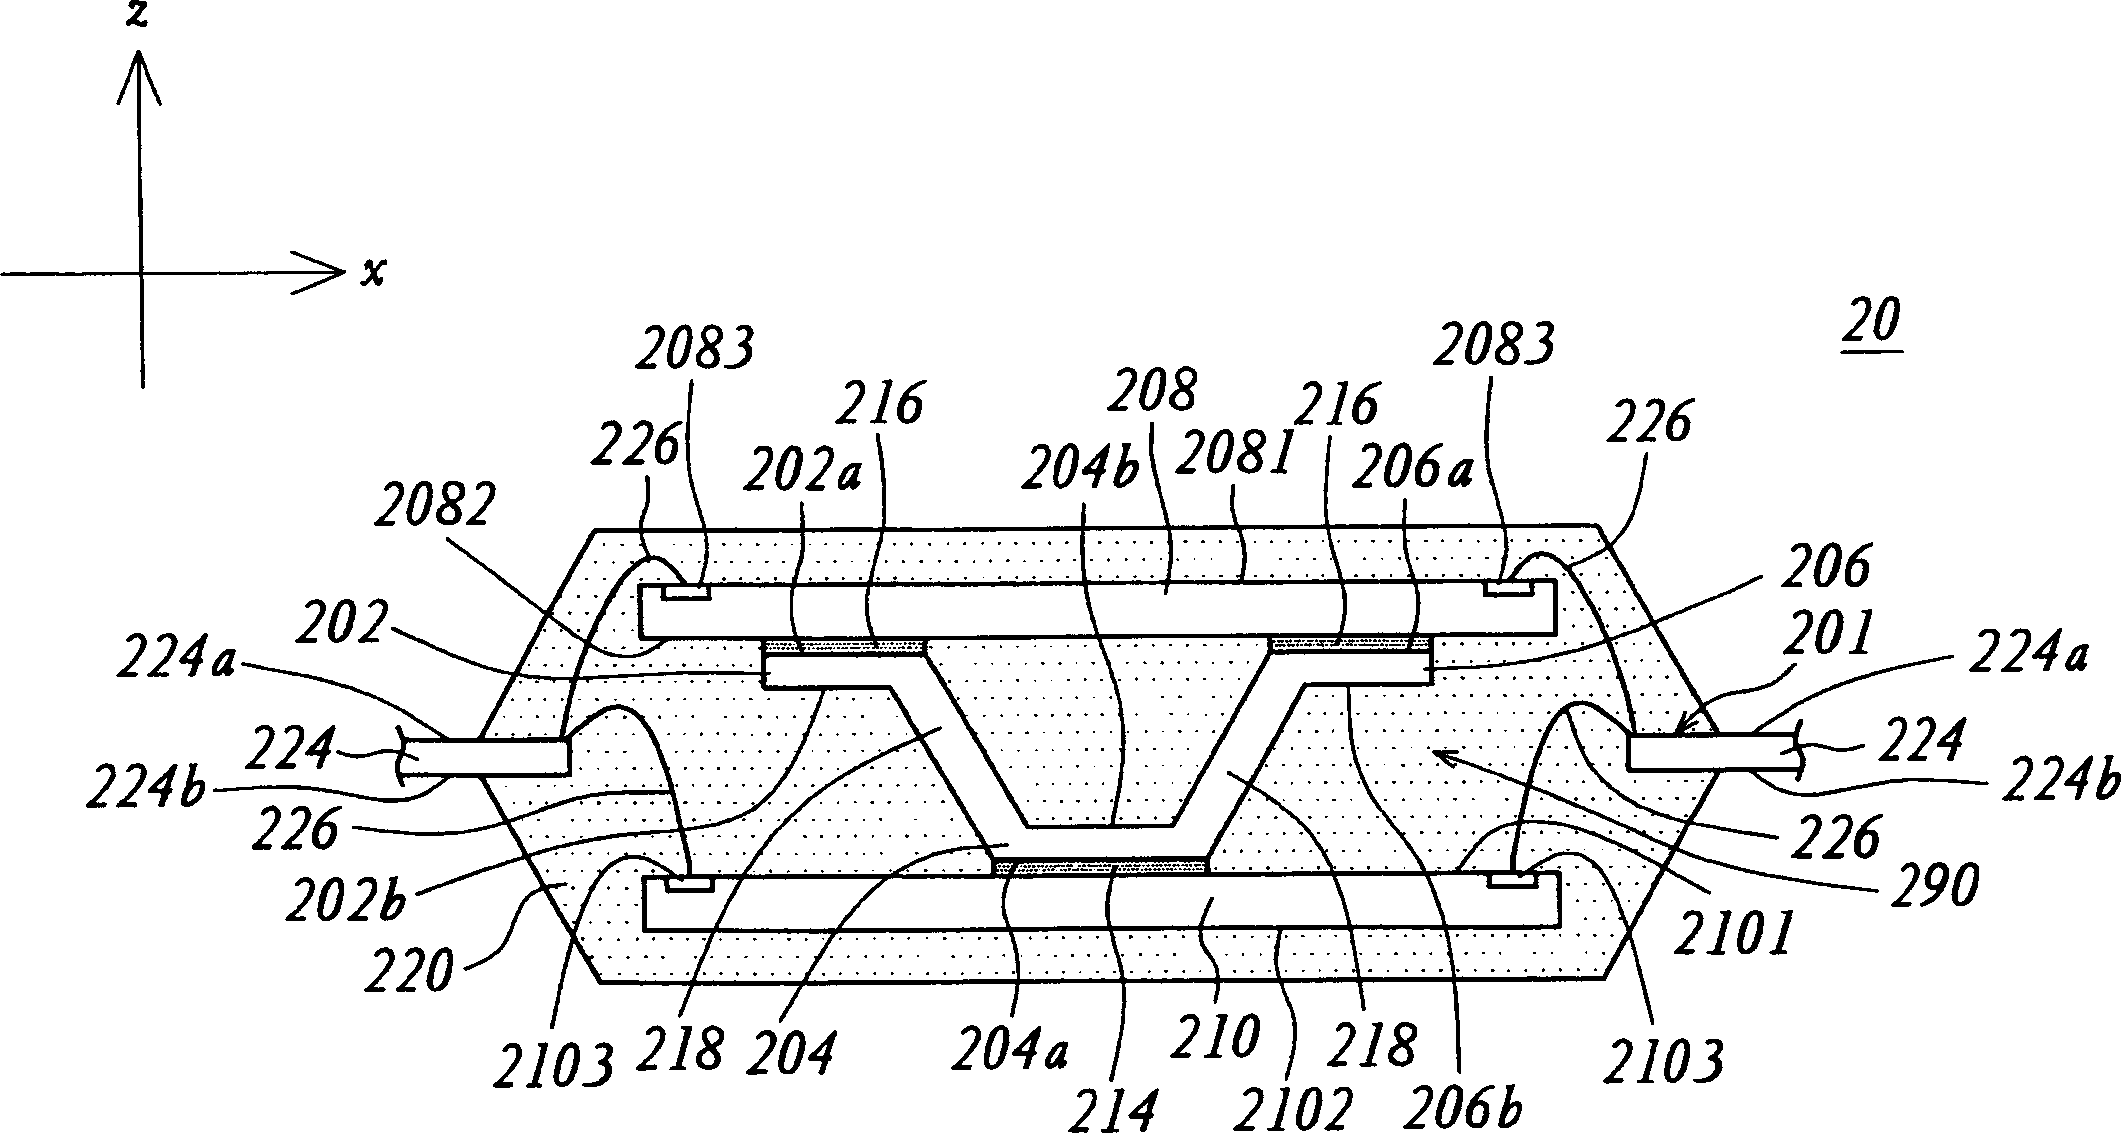 Encapsulation structure for multiple chips